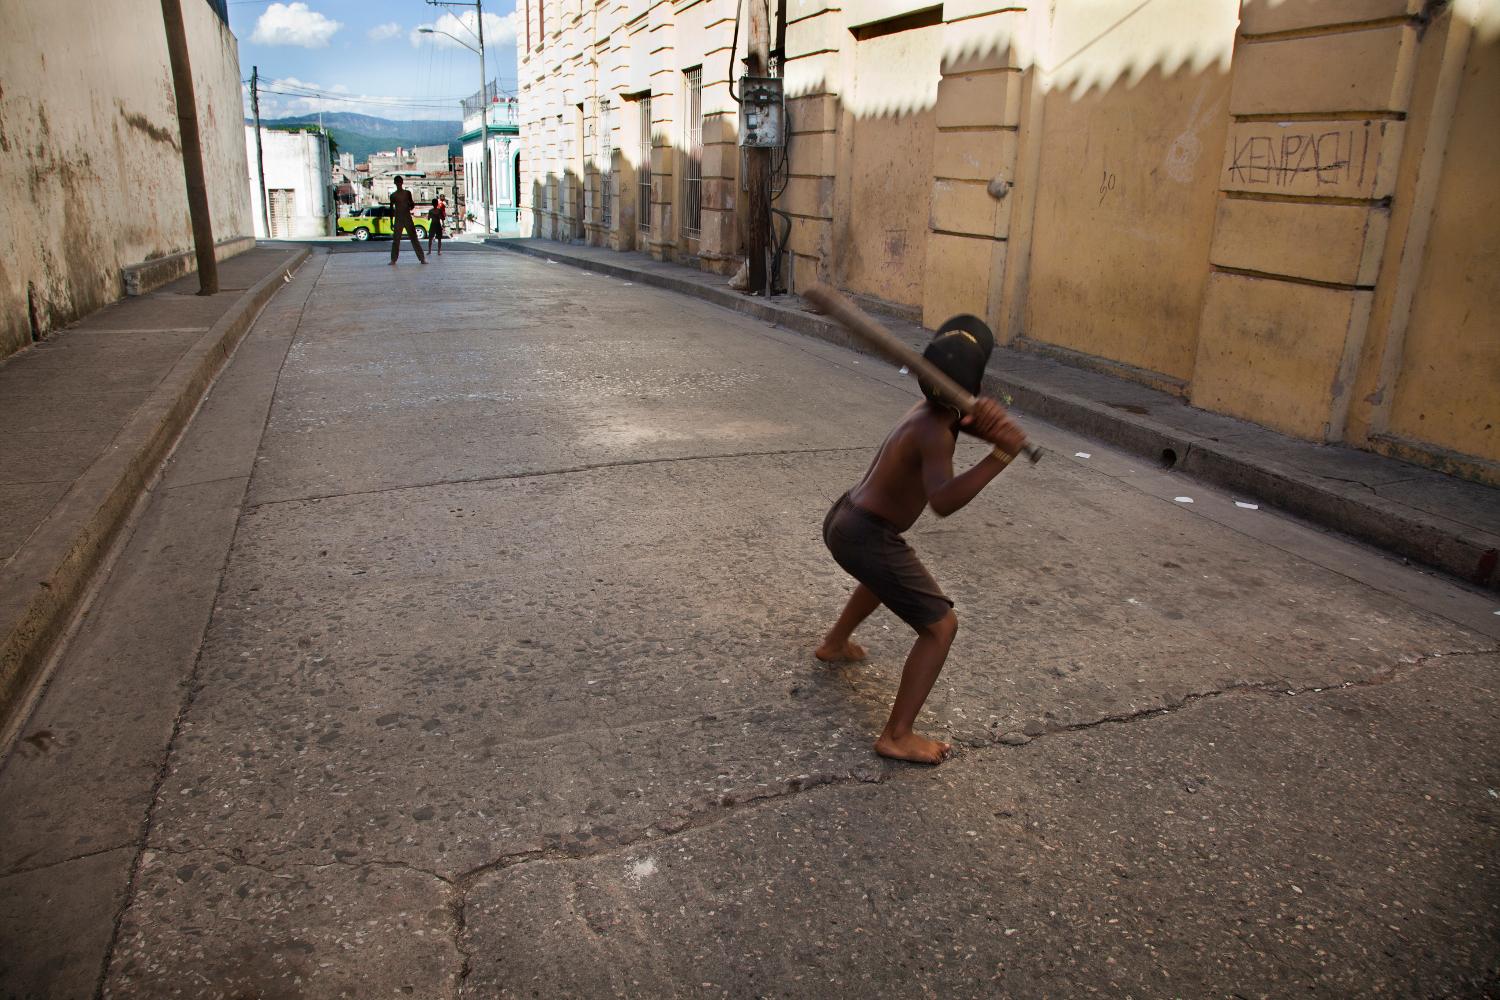 Local kids take over quiet backstreets for baseball practice. Image by Benjamin Rondel / First Light / Getty